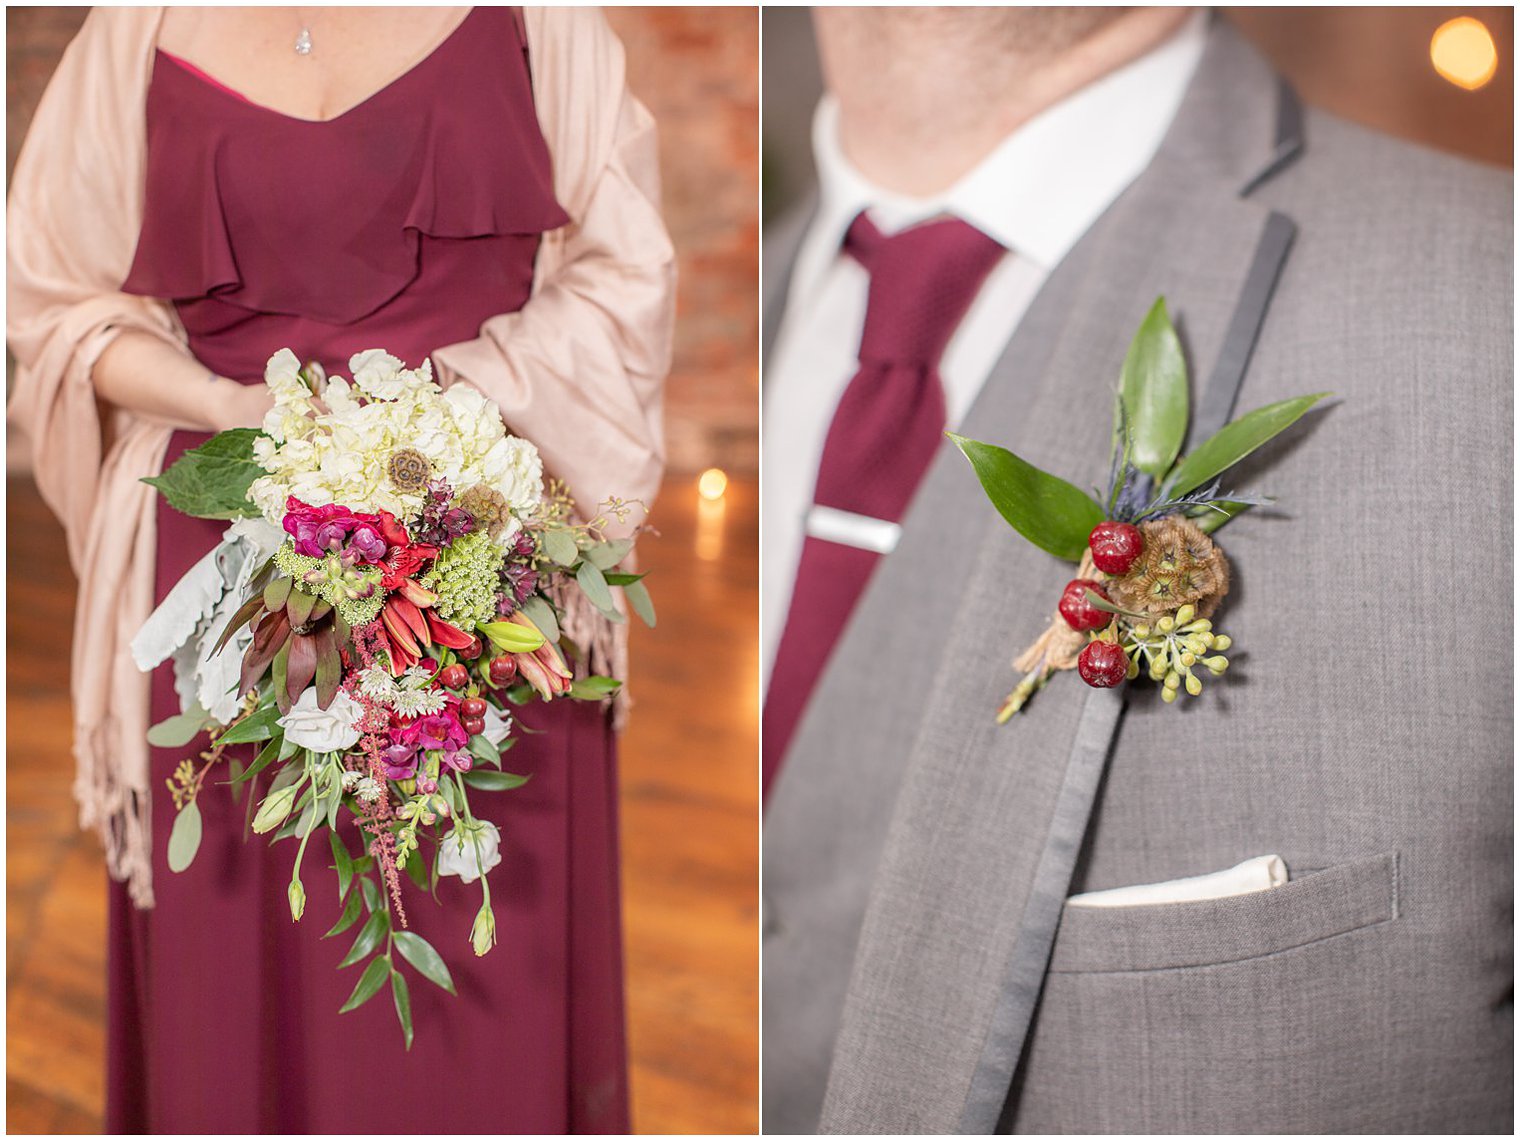 bride's winter wedding bouquet with red berries and groom's boutonniere for winter wedding by Coco & Bailey 